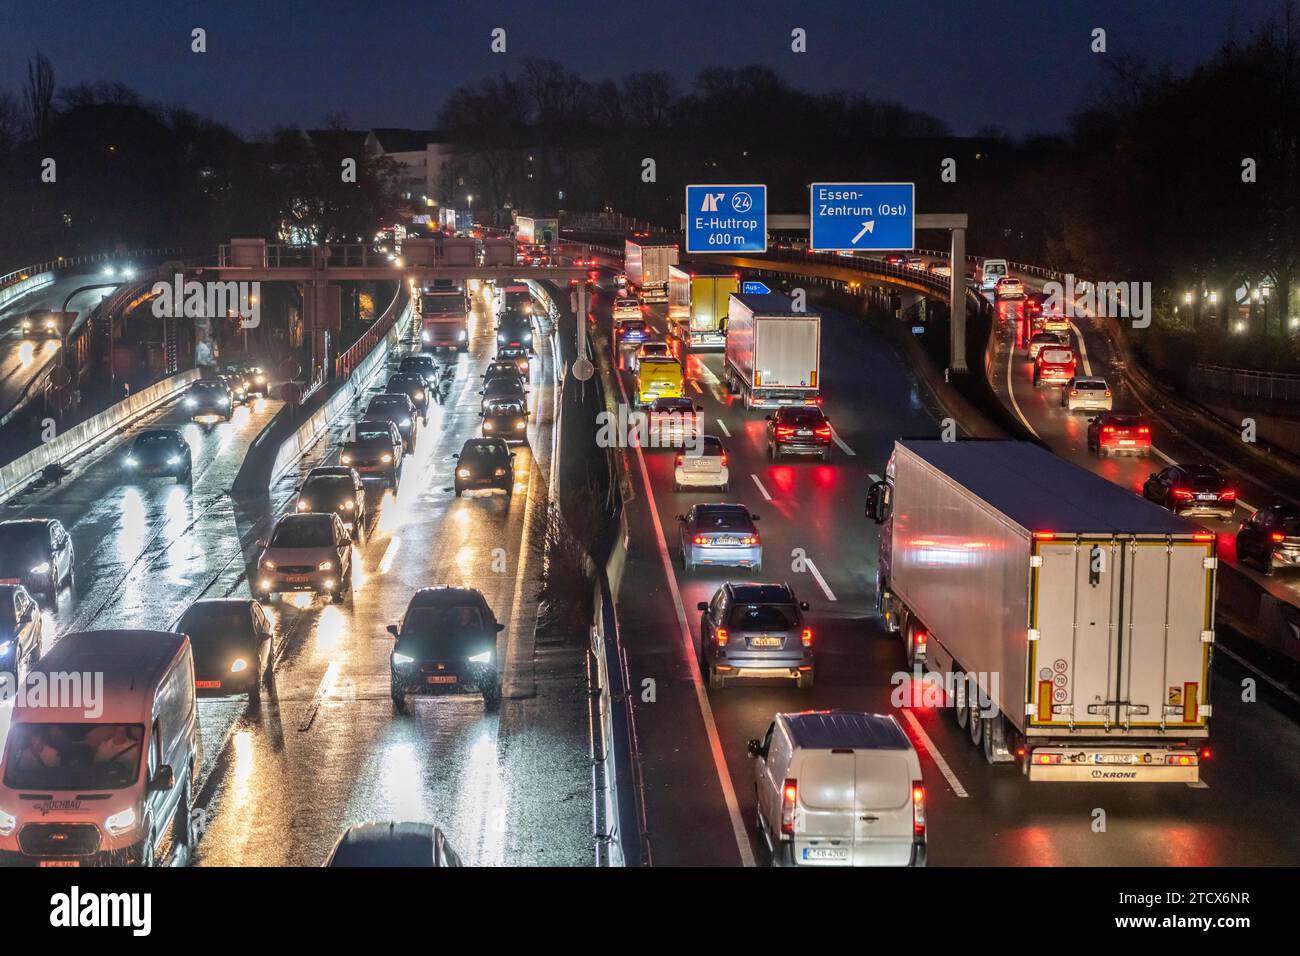 Evening traffic jam on the A40 motorway, city thoroughfare, Essen-Huttrop junction, traffic jam in both directions, NRW, Germany, Stock Photo